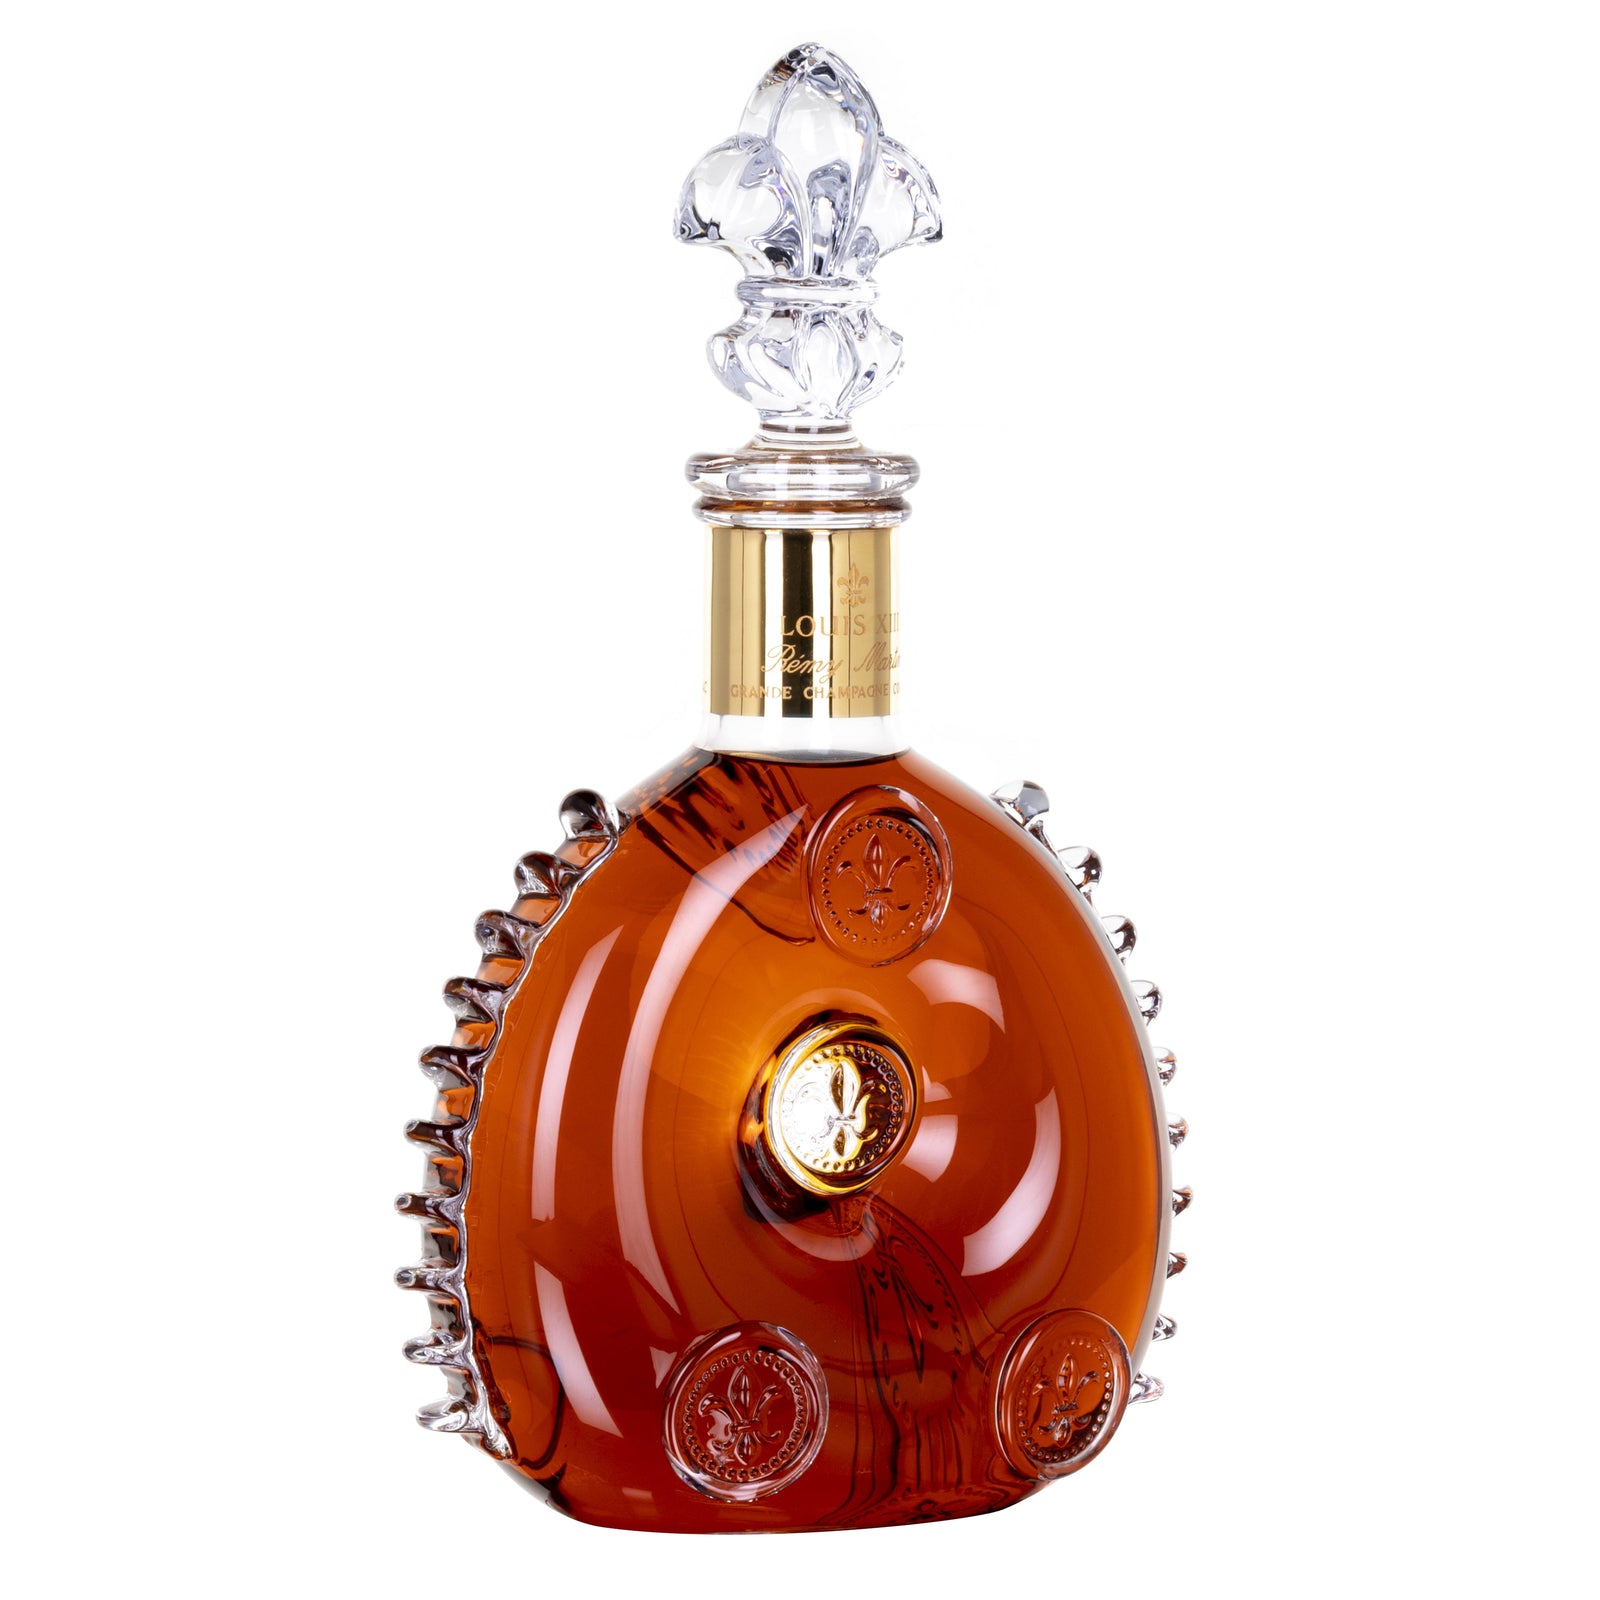 LOUIS XIII Twin Crystal Glasses for tasting cognac - Official Website